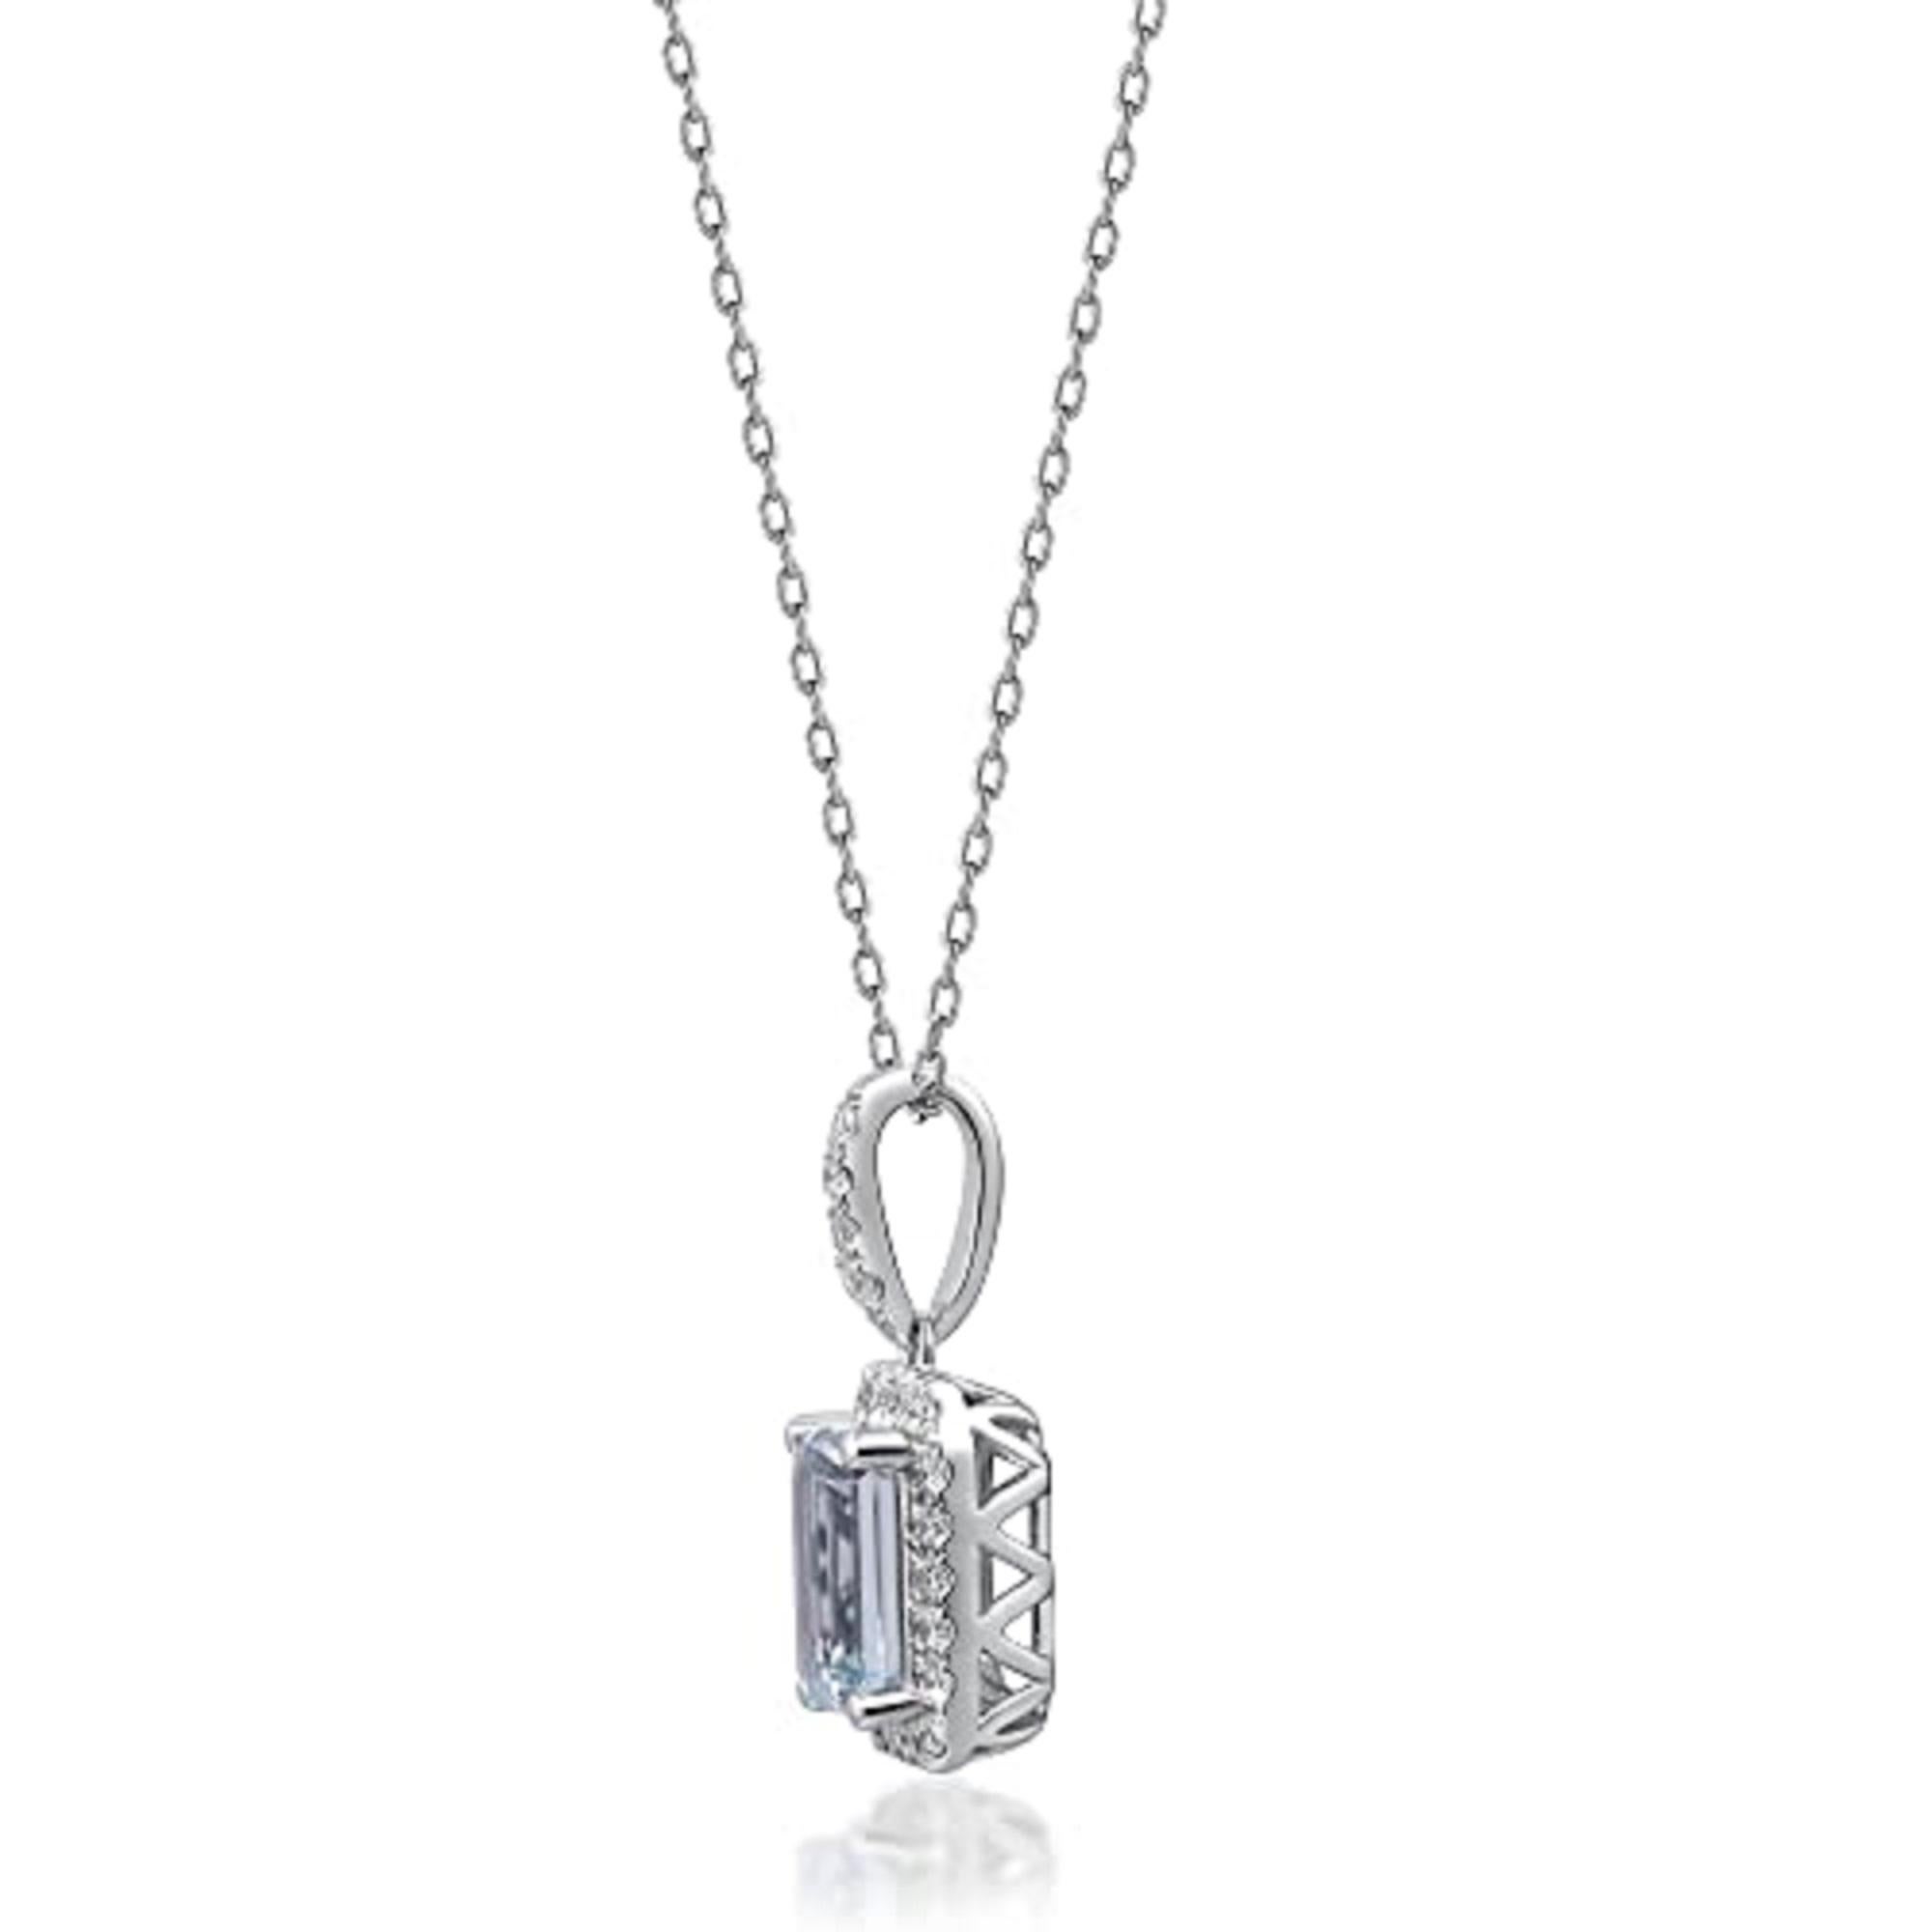 Decorate yourself in elegance with this Pendant is crafted from 14-karat White-Gold by Gin & Grace Pendant. This Pendant is made up of 5*7 Emerald-cut Aquamarine (1 Pcs) 0.95 Carat and Round-Cut Prong setting White Diamond (24 Pcs) 0.18 Carat. This